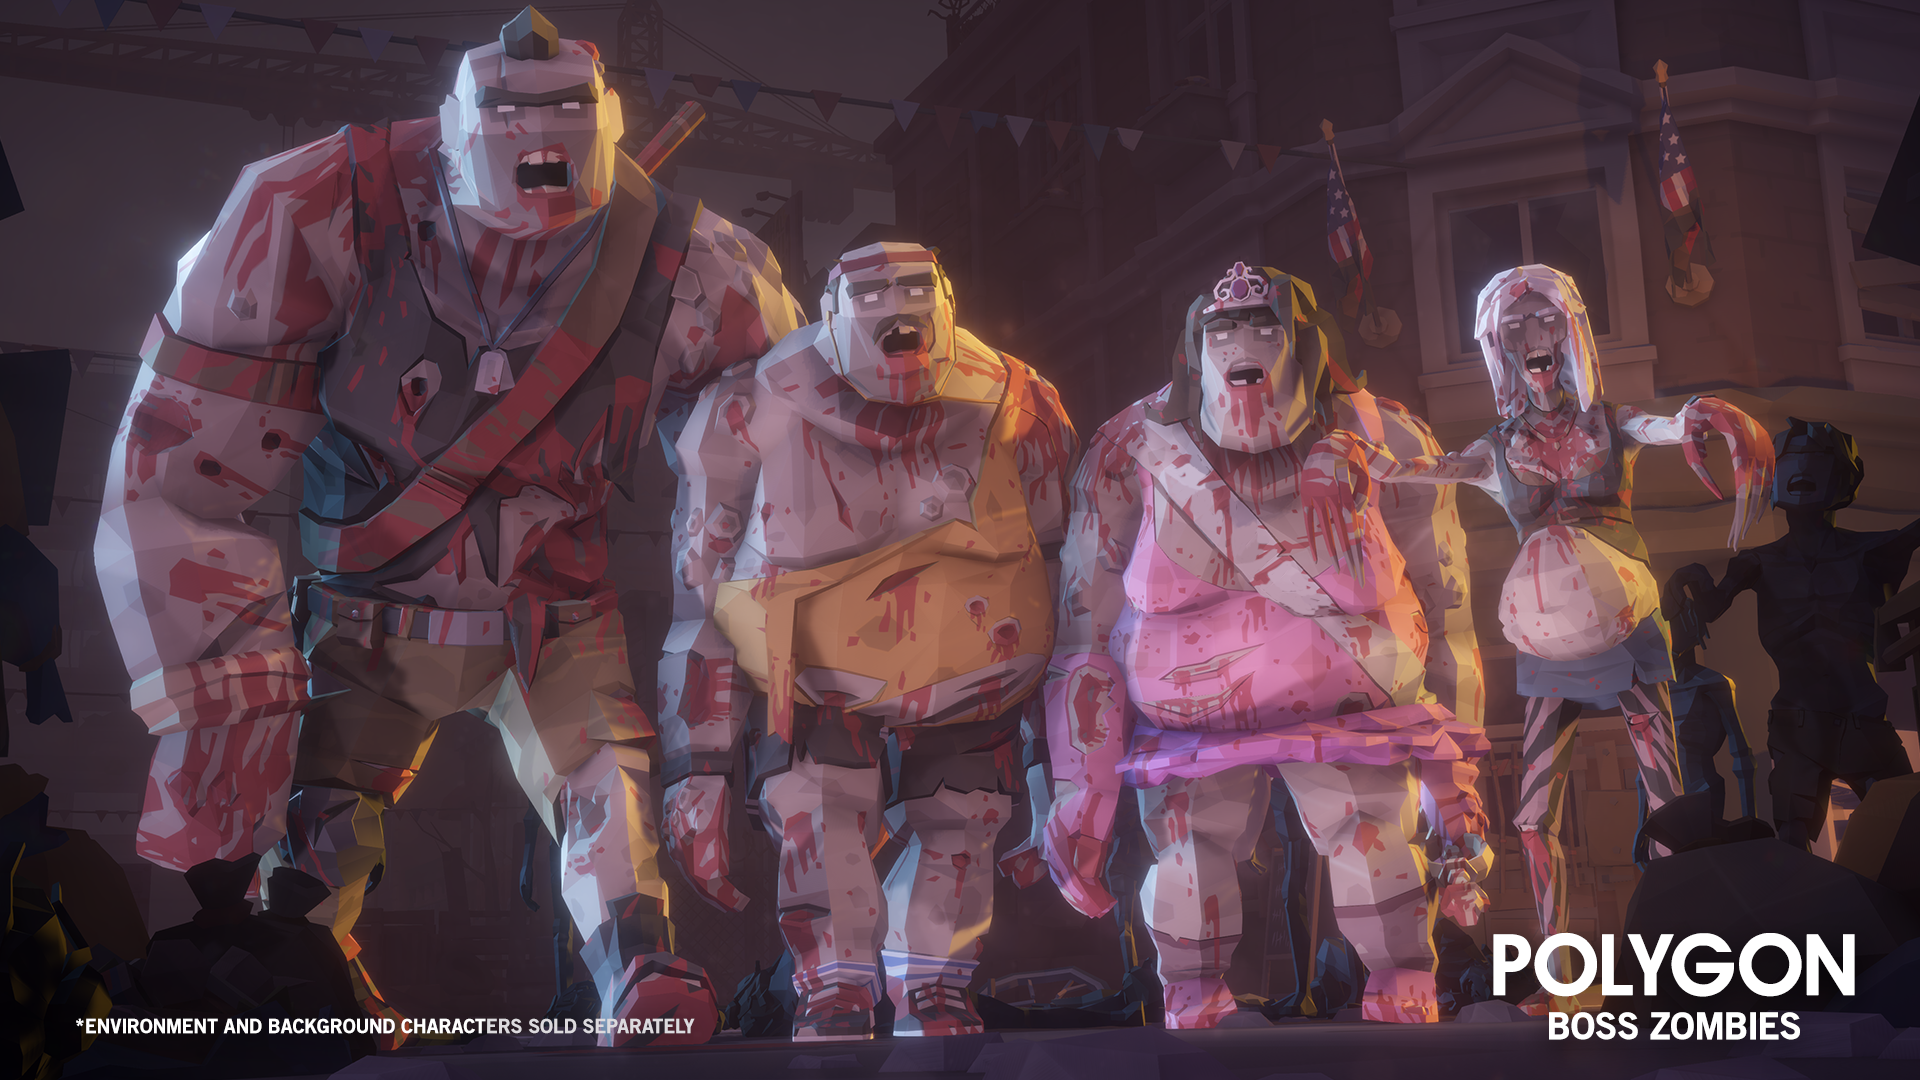 Male and female zombie characters as part of the Polygon Boss Zombies asset pack for Unreal and Unity game development